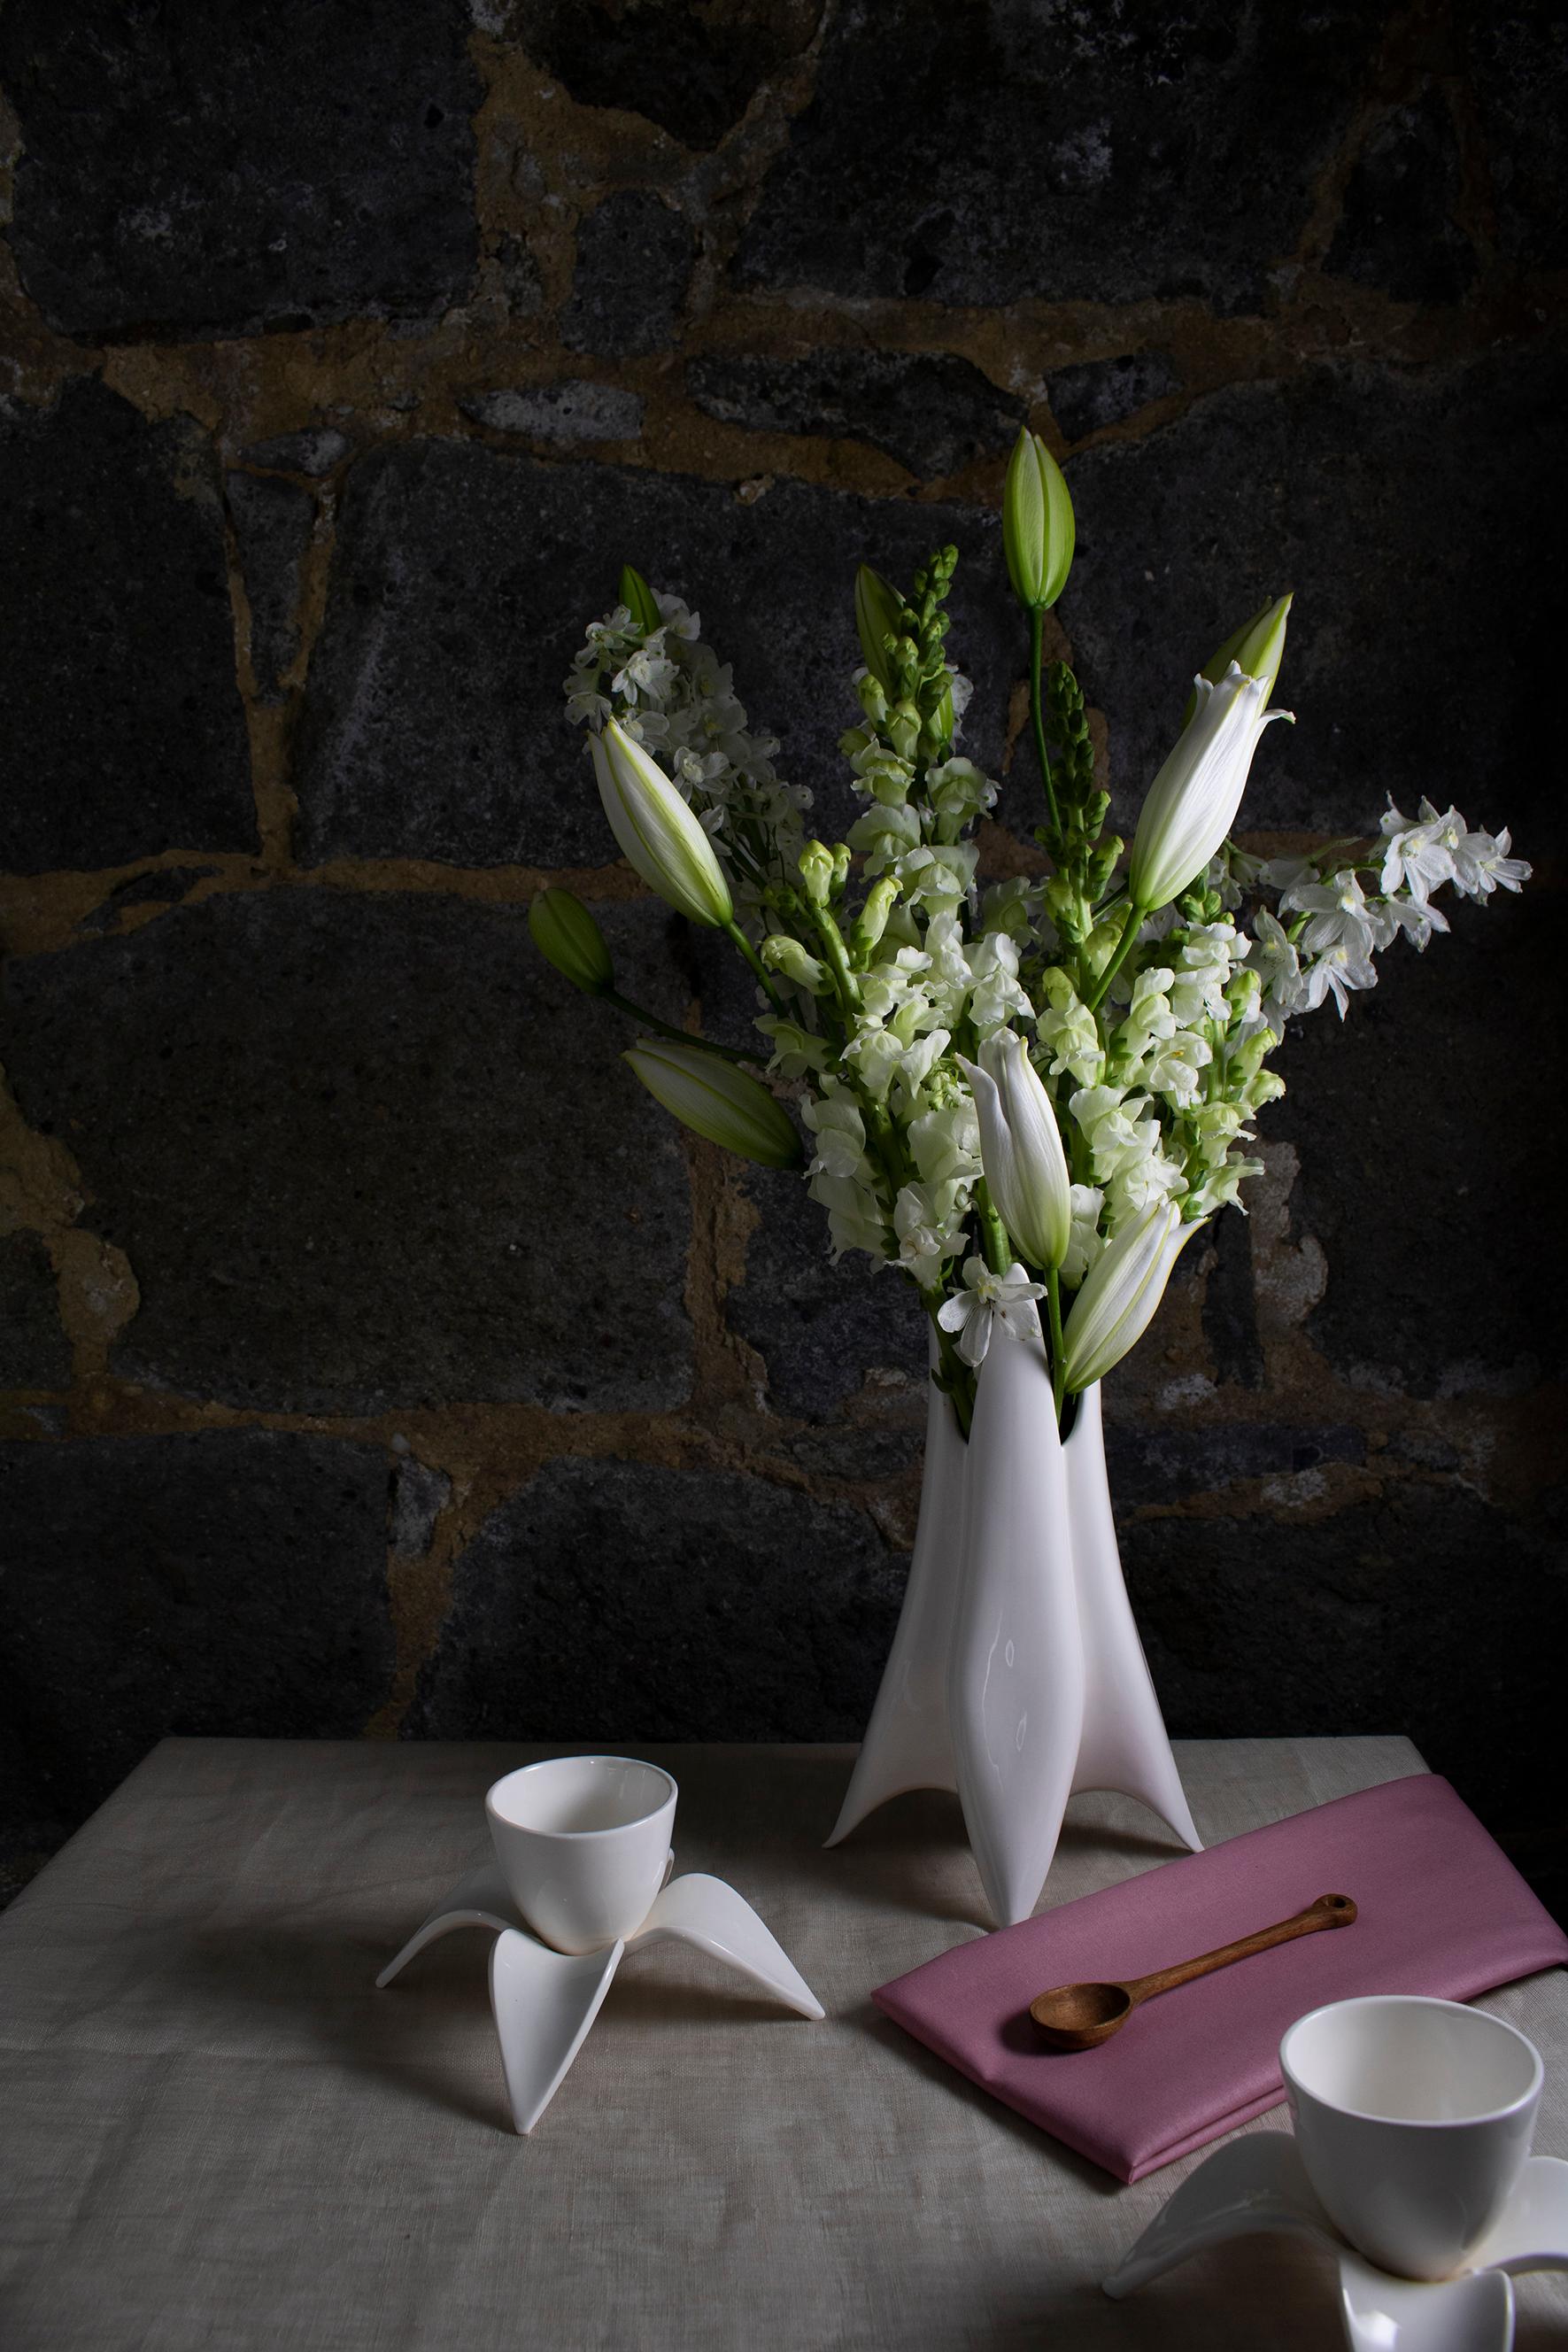 Introducing the Abelia Vase, a beautiful and sophisticated piece that will add a touch of elegance to your home decor. Handcrafted in New Zealand, this stunning vase is designed with a delicately shaped Abelia petal base that captures the essence of